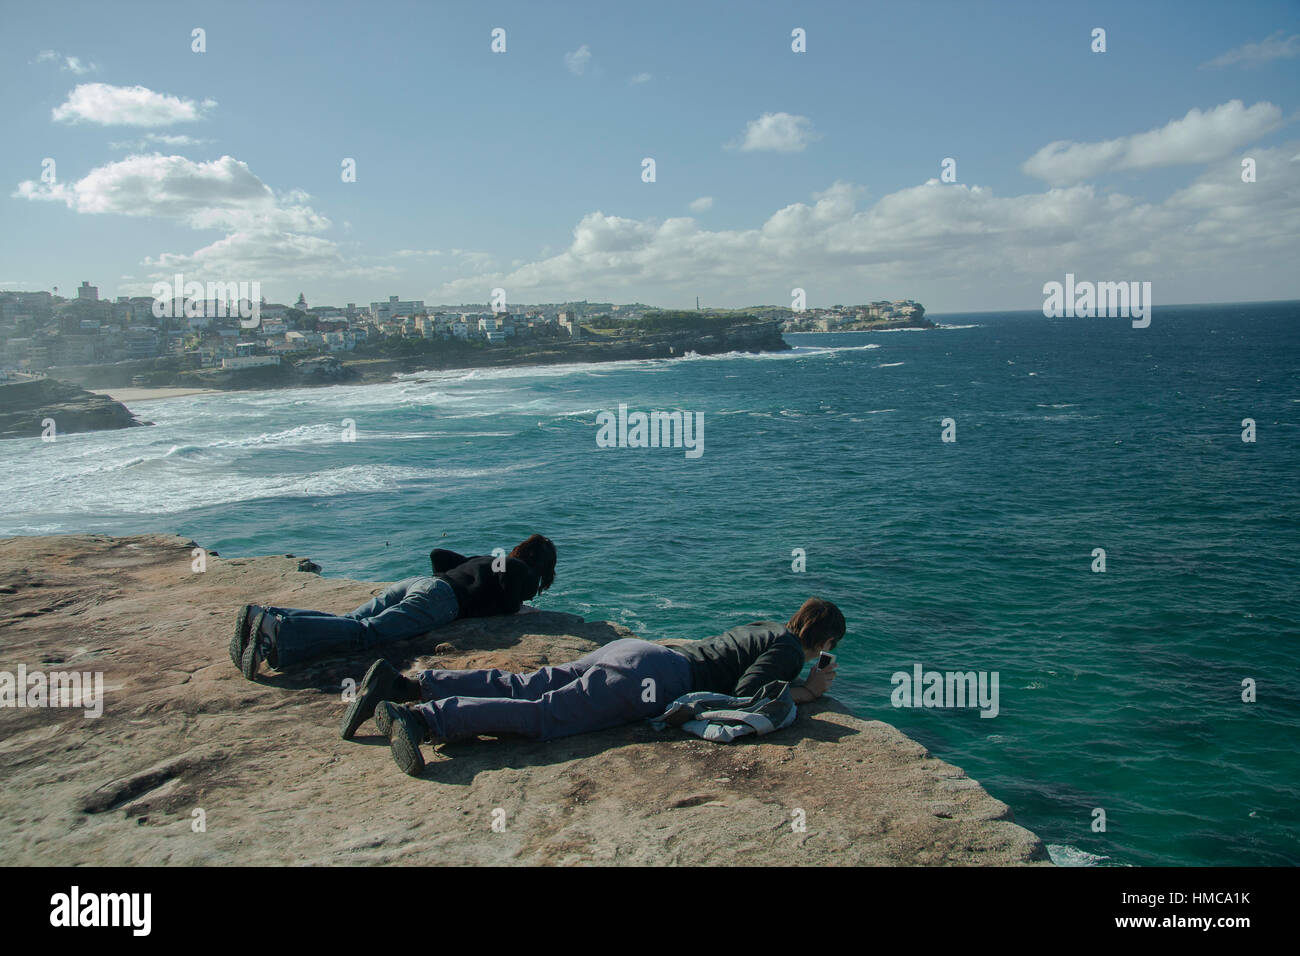 two people looking over clifftop, seascape, landscape, Australia Stock Photo